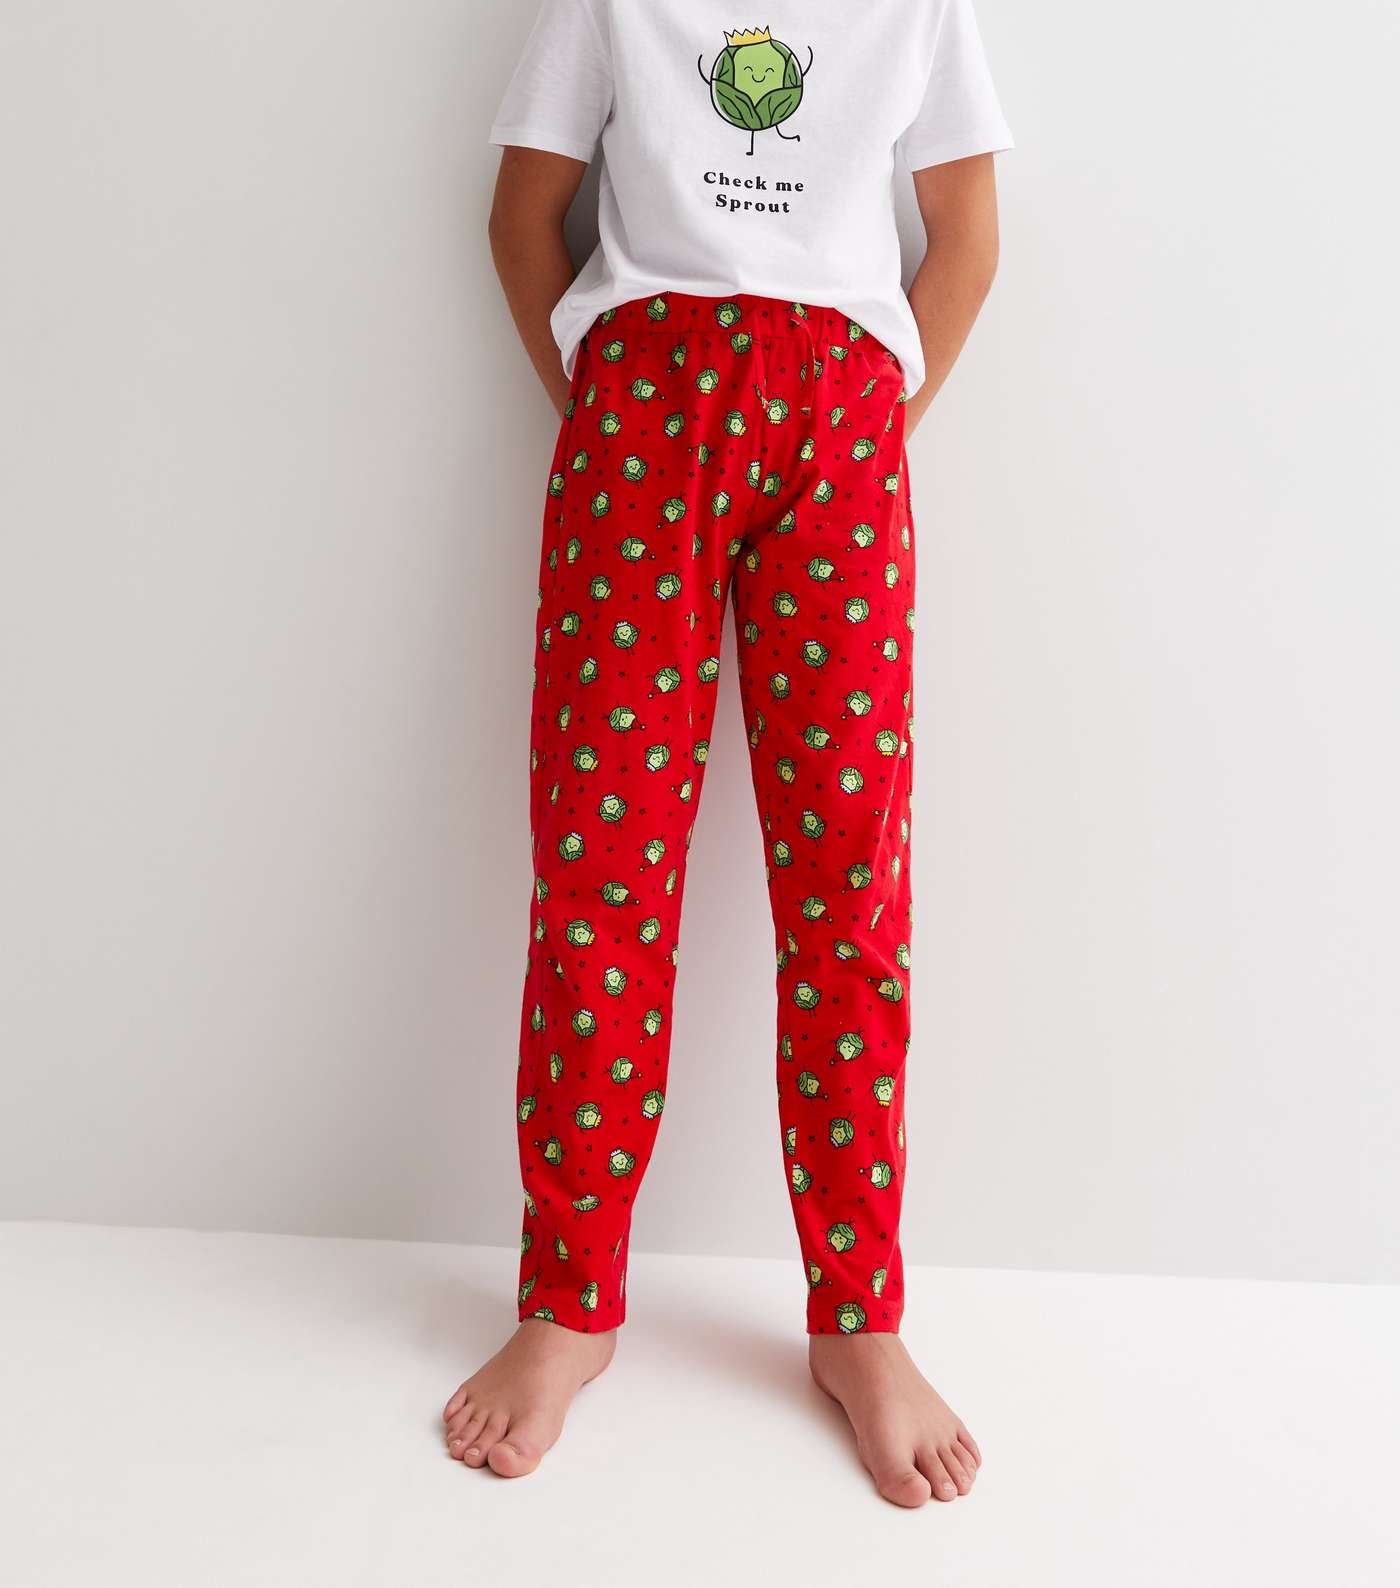 Boys White Christmas Jogger Family Pyjama Set with Brussel Sprouts Logo Image 4